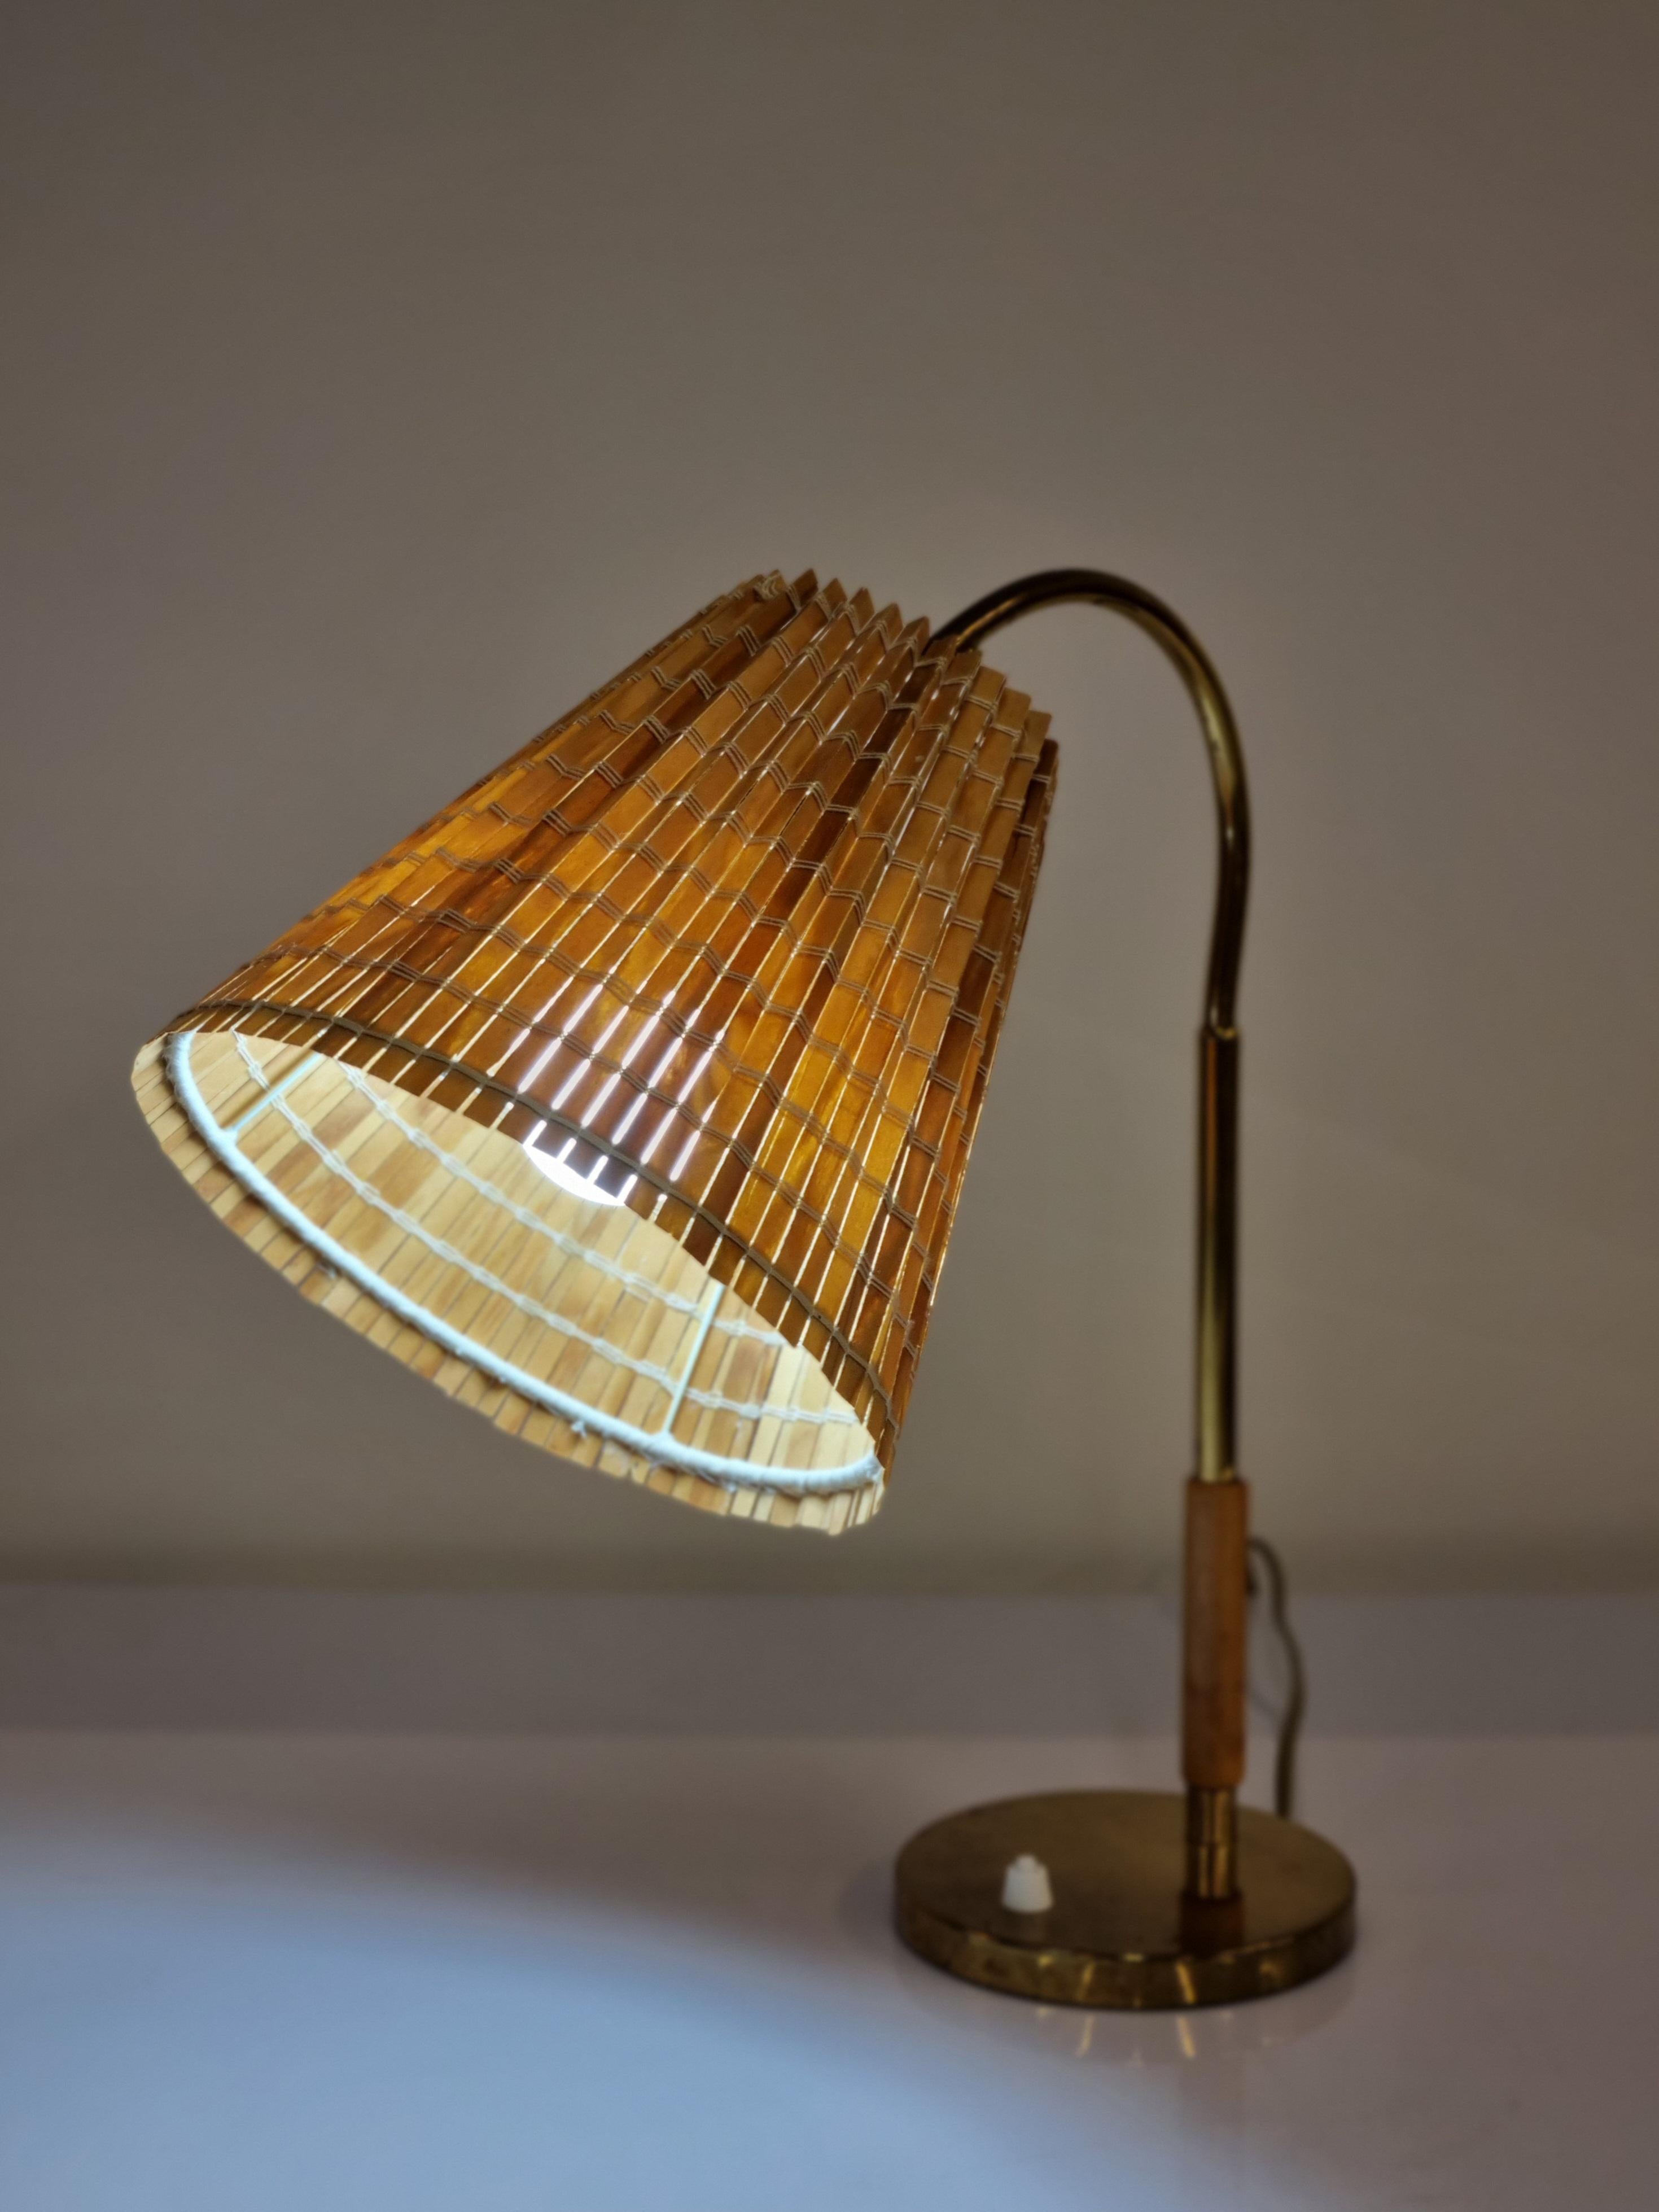 Paavo Tynell has designed this lamp model 9201 in the 1940s for Taito Oy.
This delicate table lamp has a brass body with a wooden handle part on the bottom of the tube. 
The adjustable wooden weaved shade is filtering light well. The electric wiring